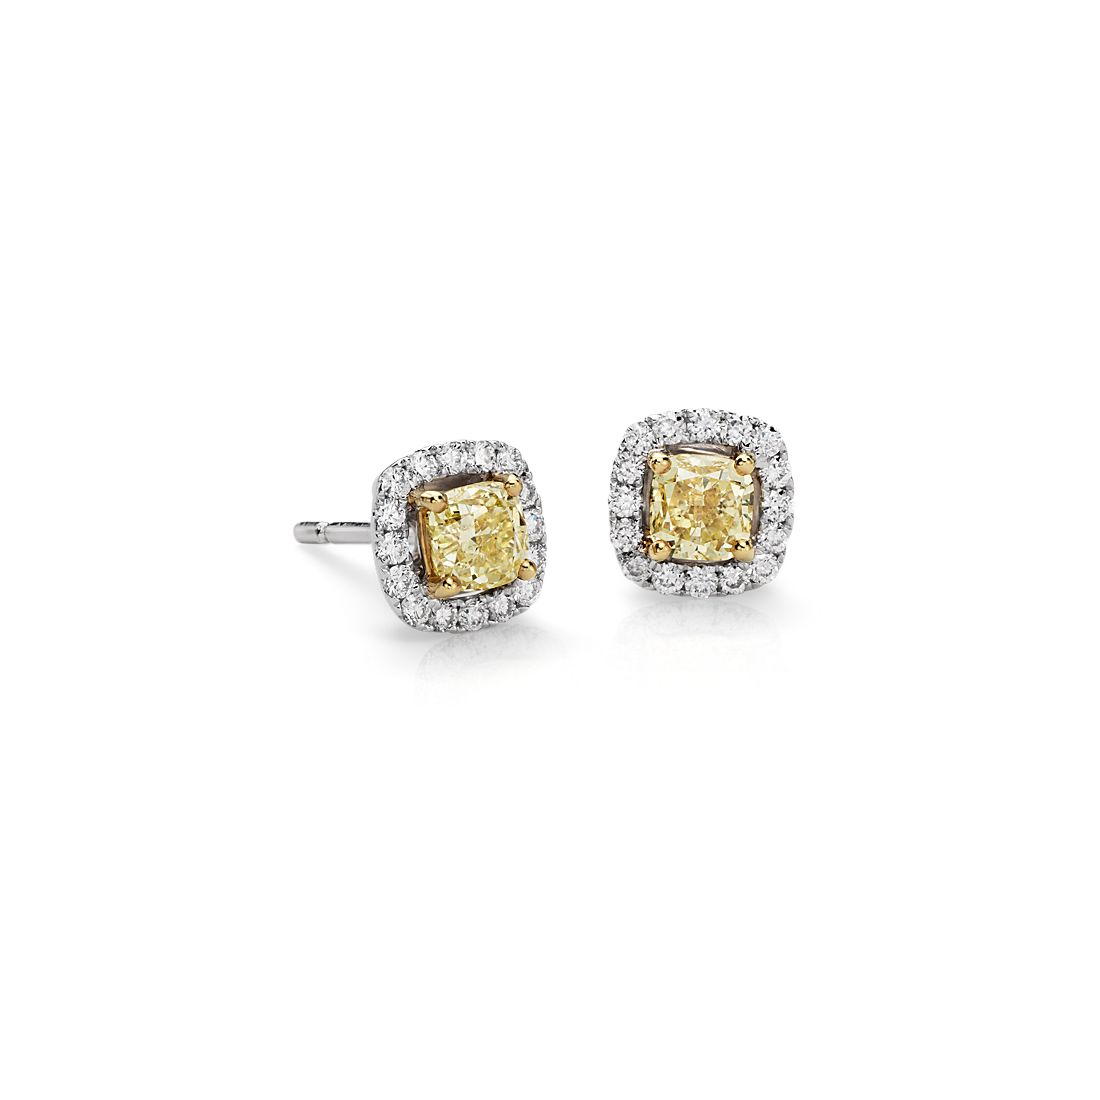 1.39 Ct Round VVS1 Diamond Cluster Halo Stud Earrings 14K Yellow Gold Plated For Womens 